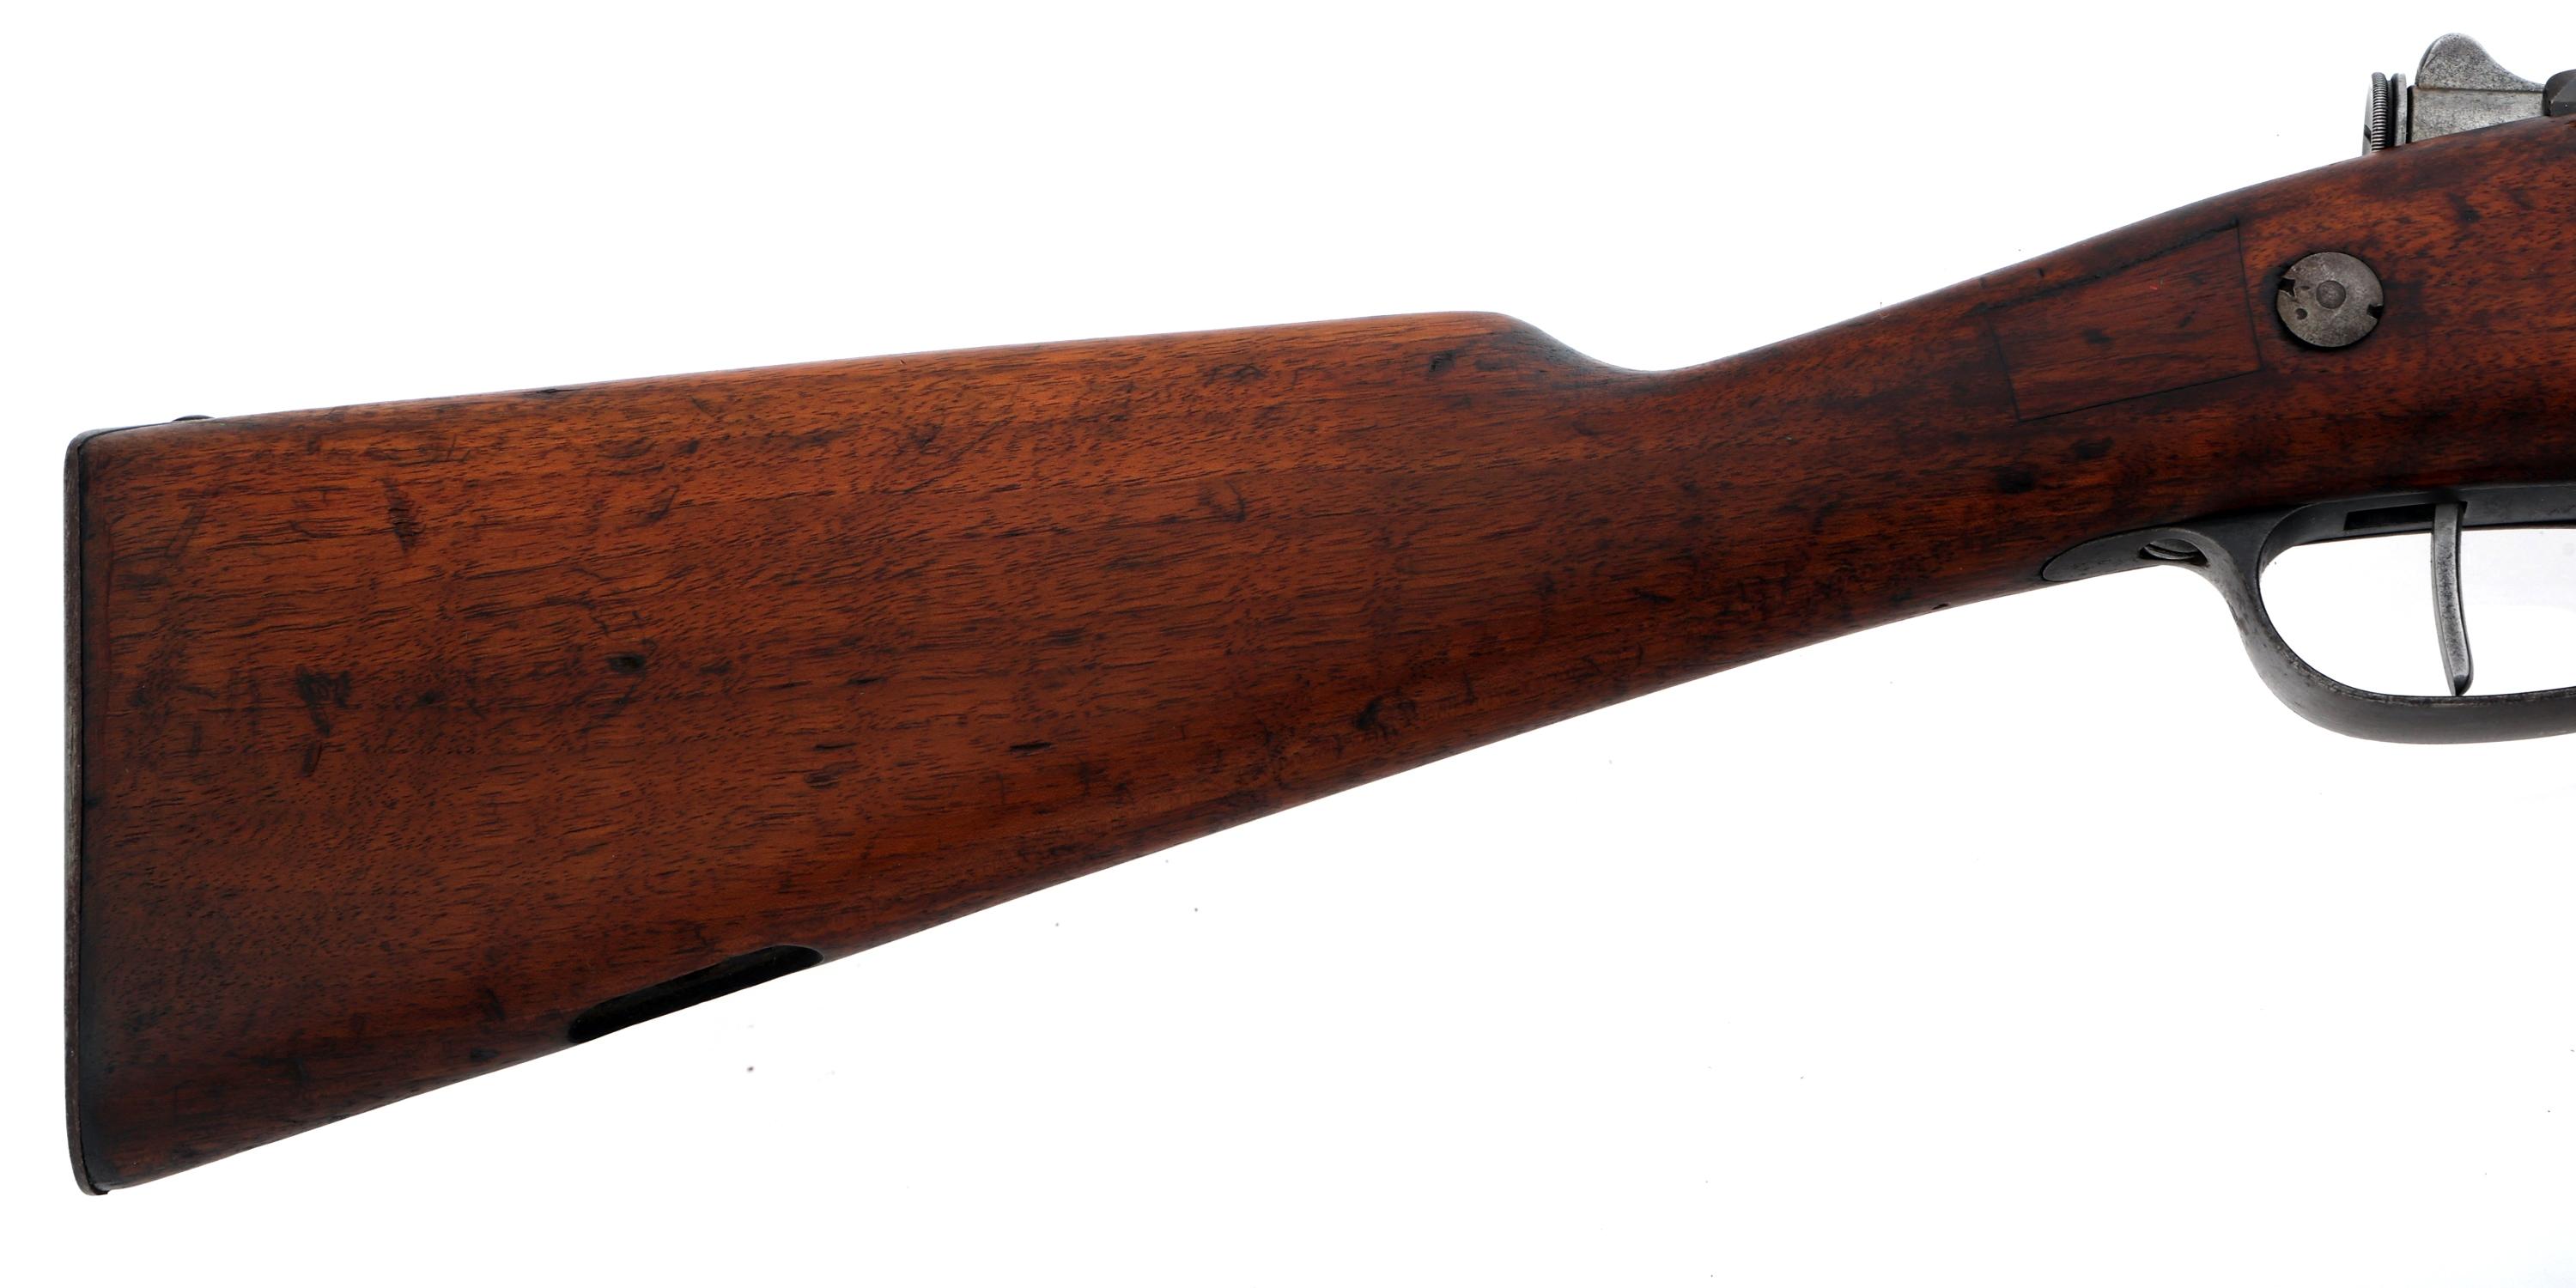 FRENCH ST ETIENNE MODEL 1892 8x50mm CAL CARBINE